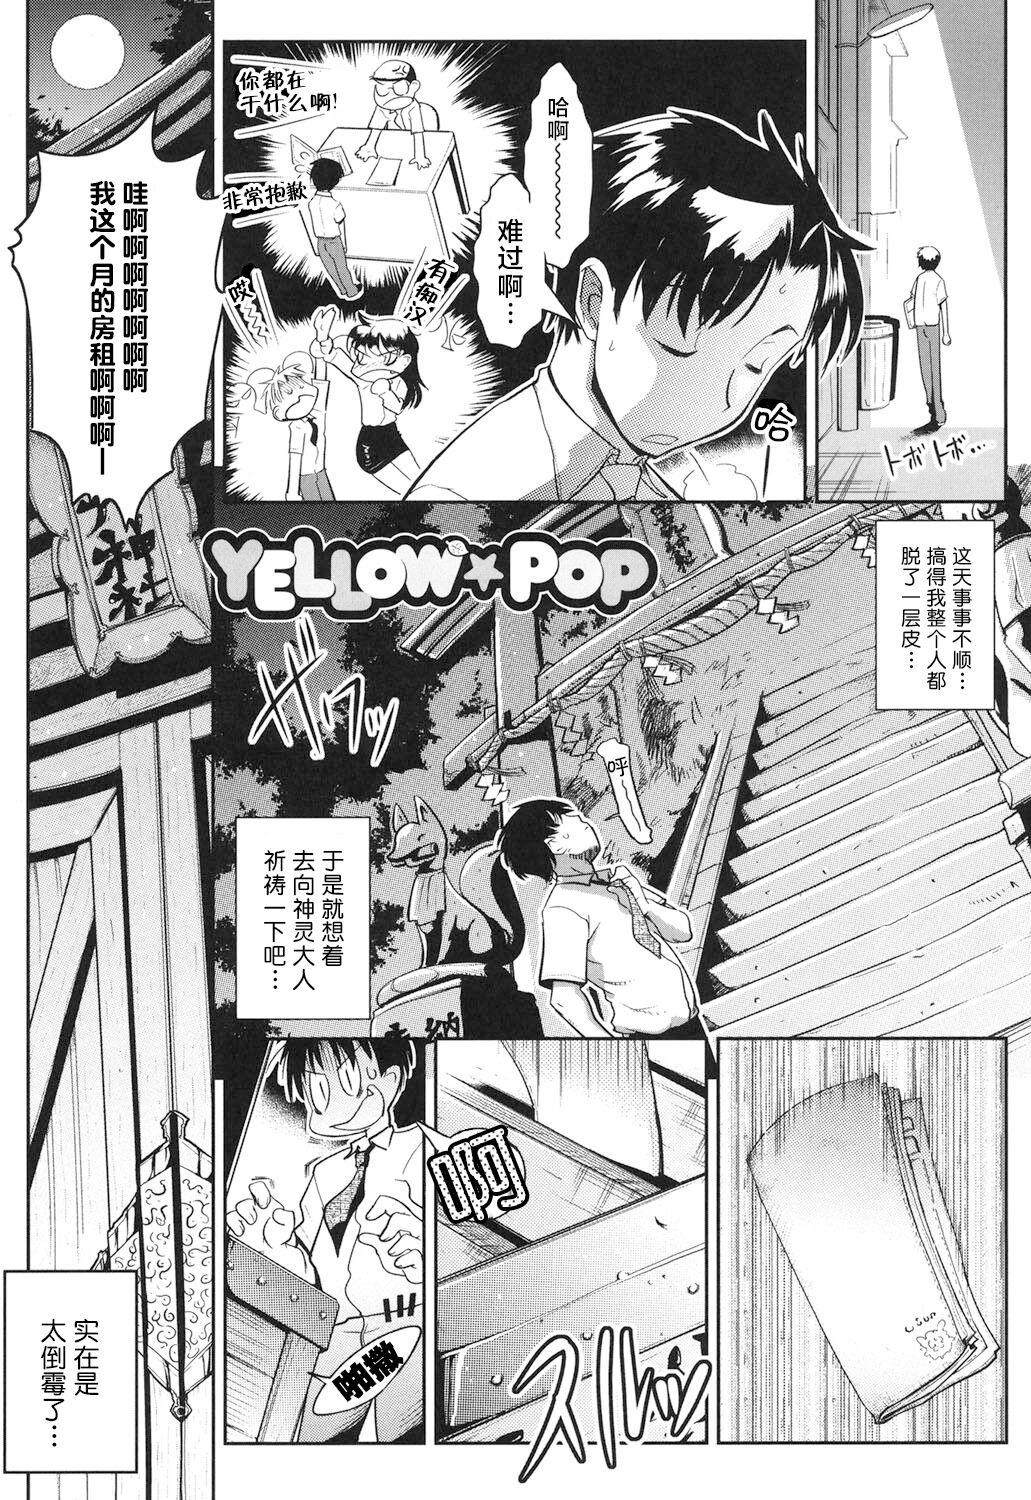 Dick Suck YELLOW★POP Ch. 1 Exgf - Page 2